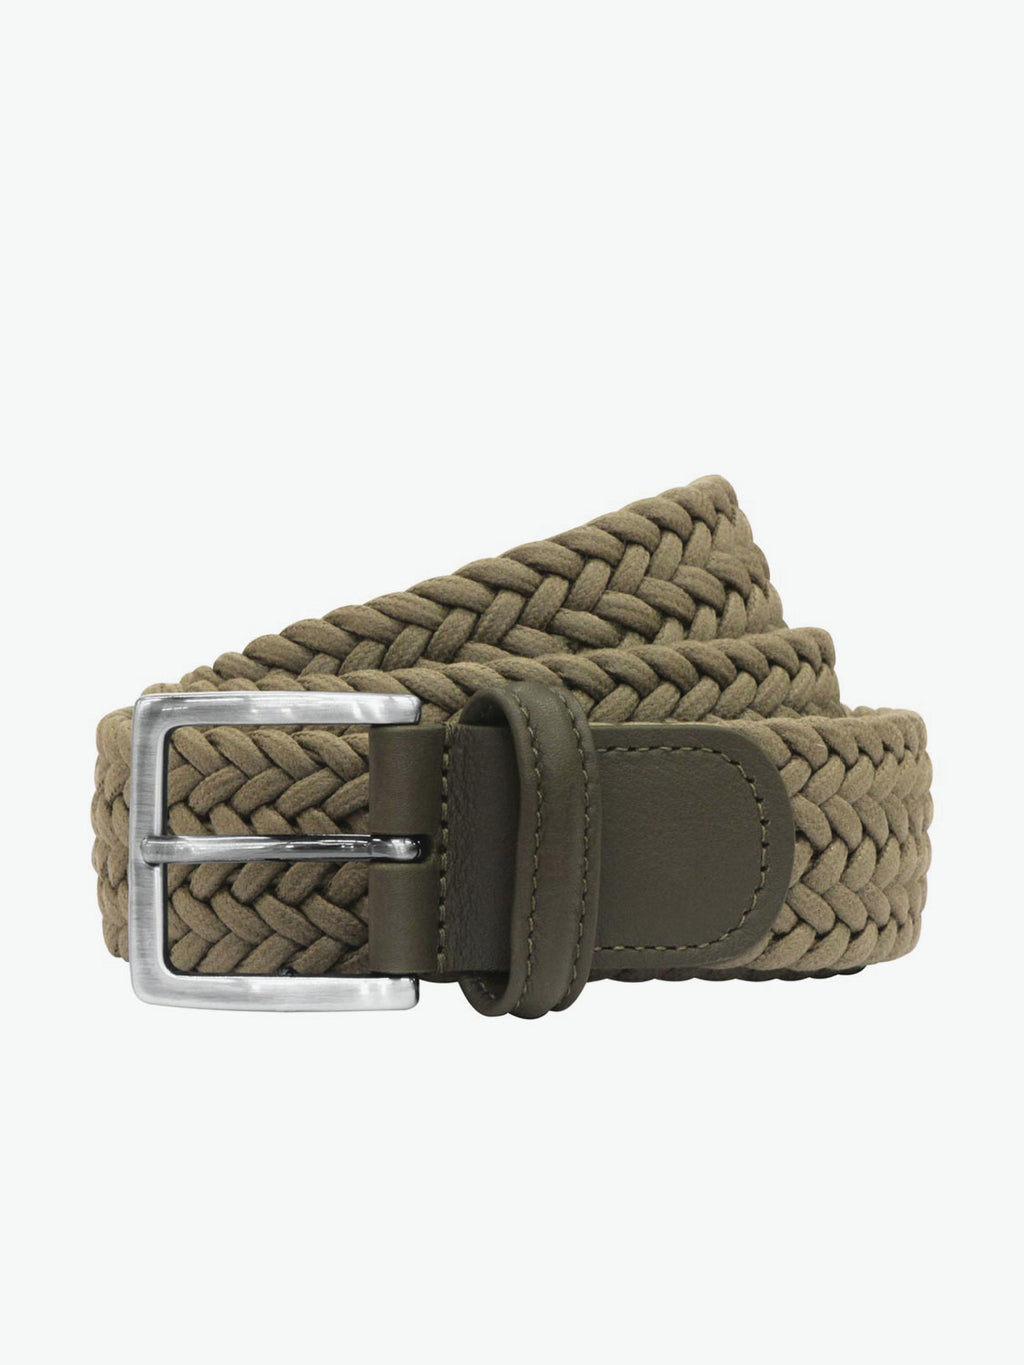 Braided Woven Leather Belt Green Tan